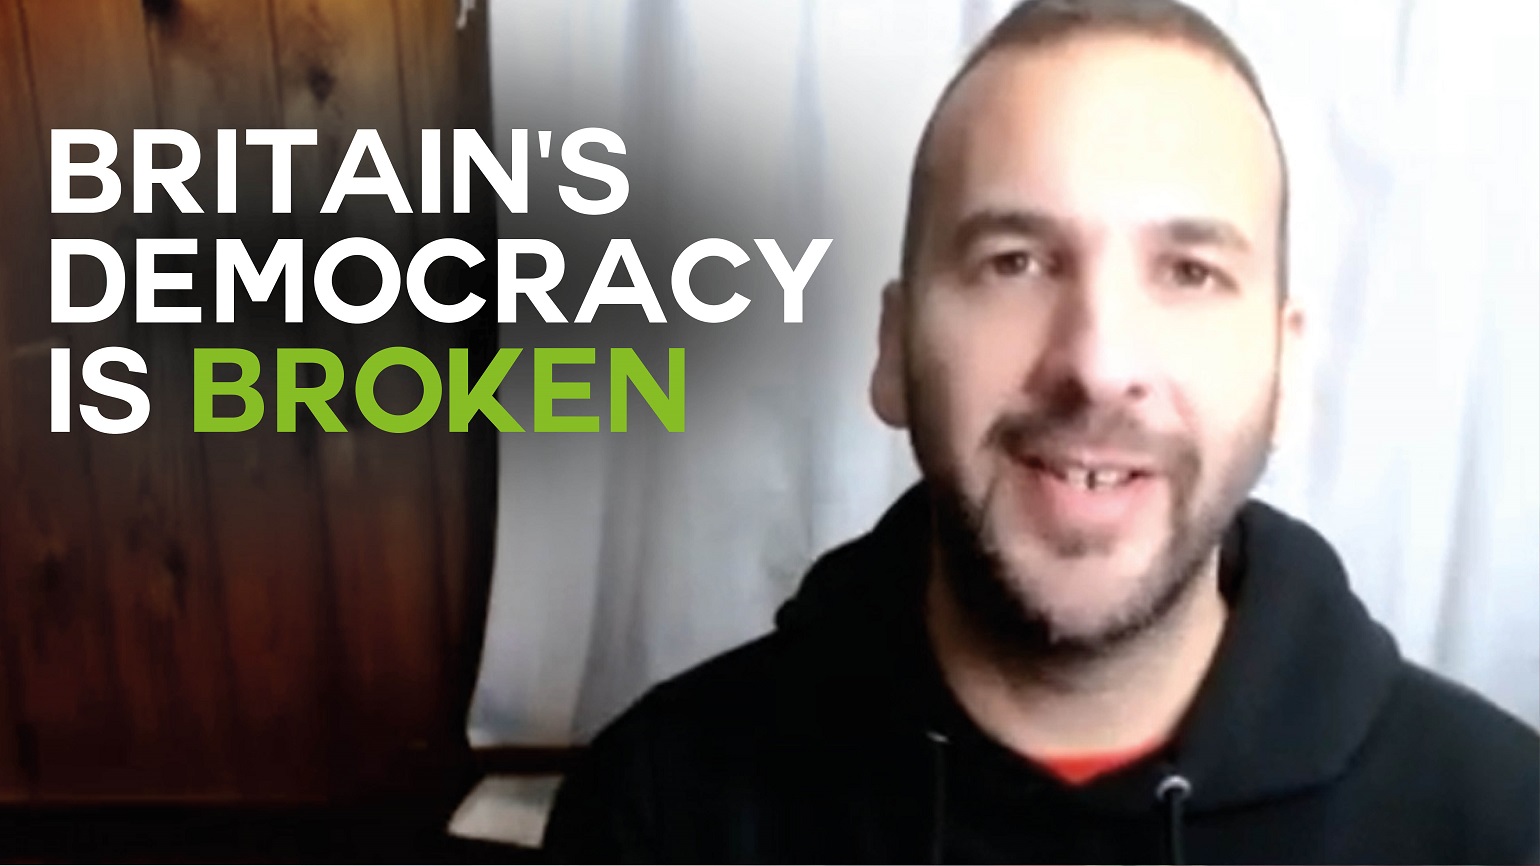 Zack Polanski appearing on Bright Green Live with text overlaid reading "Britain's Democracy is Broken"